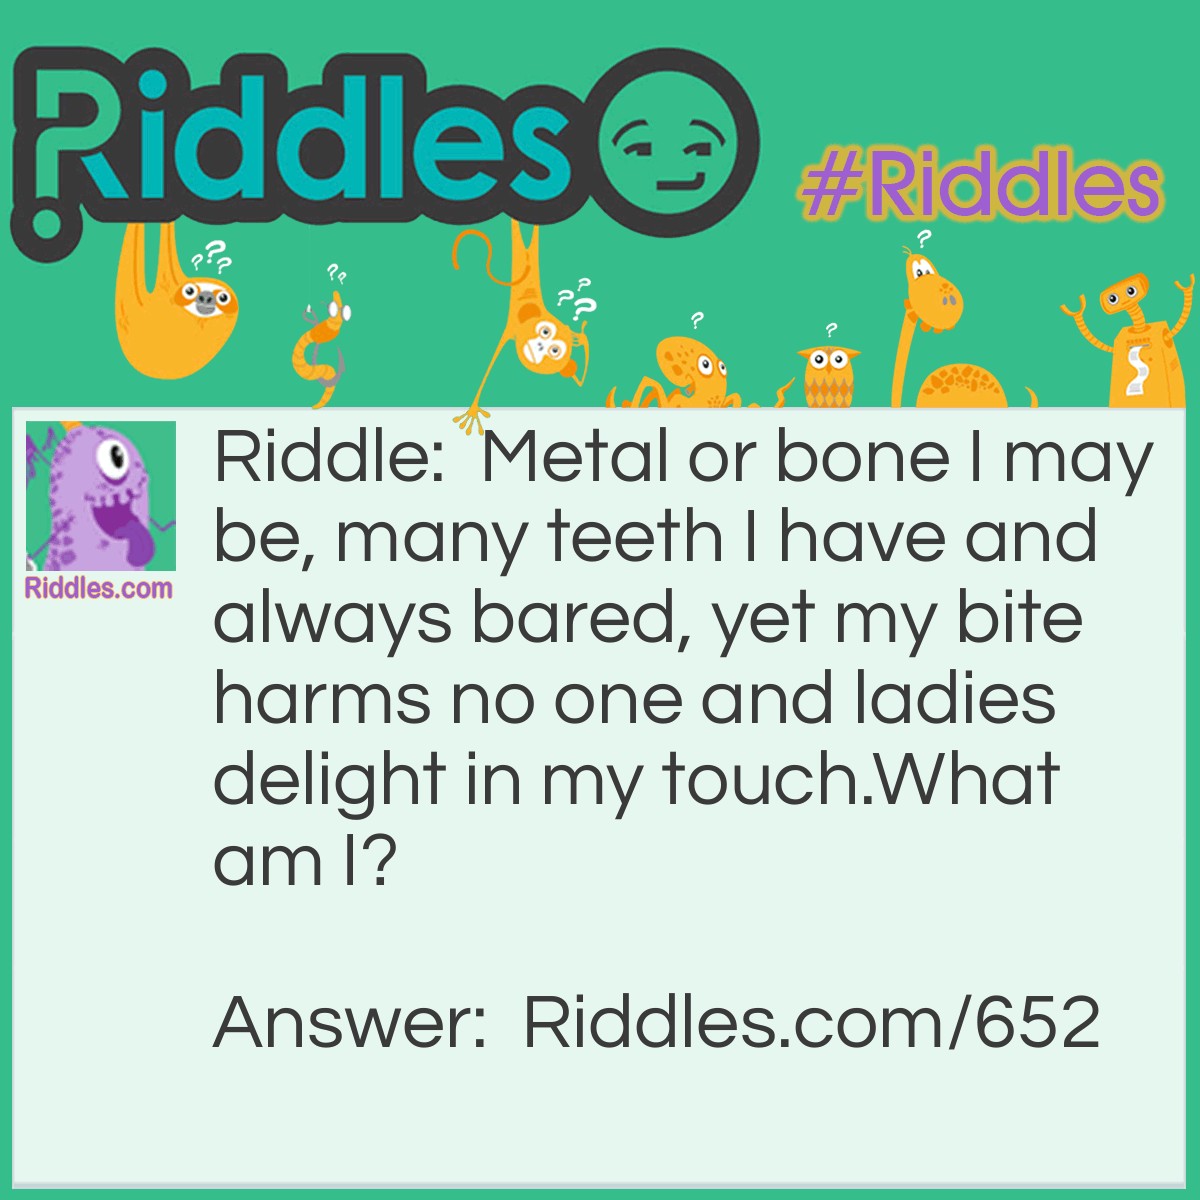 Riddle: Metal or bone I may be, many teeth I have and always bared, yet my bite harms no one, and ladies delight in my touch. 
What am I? Answer: A comb.